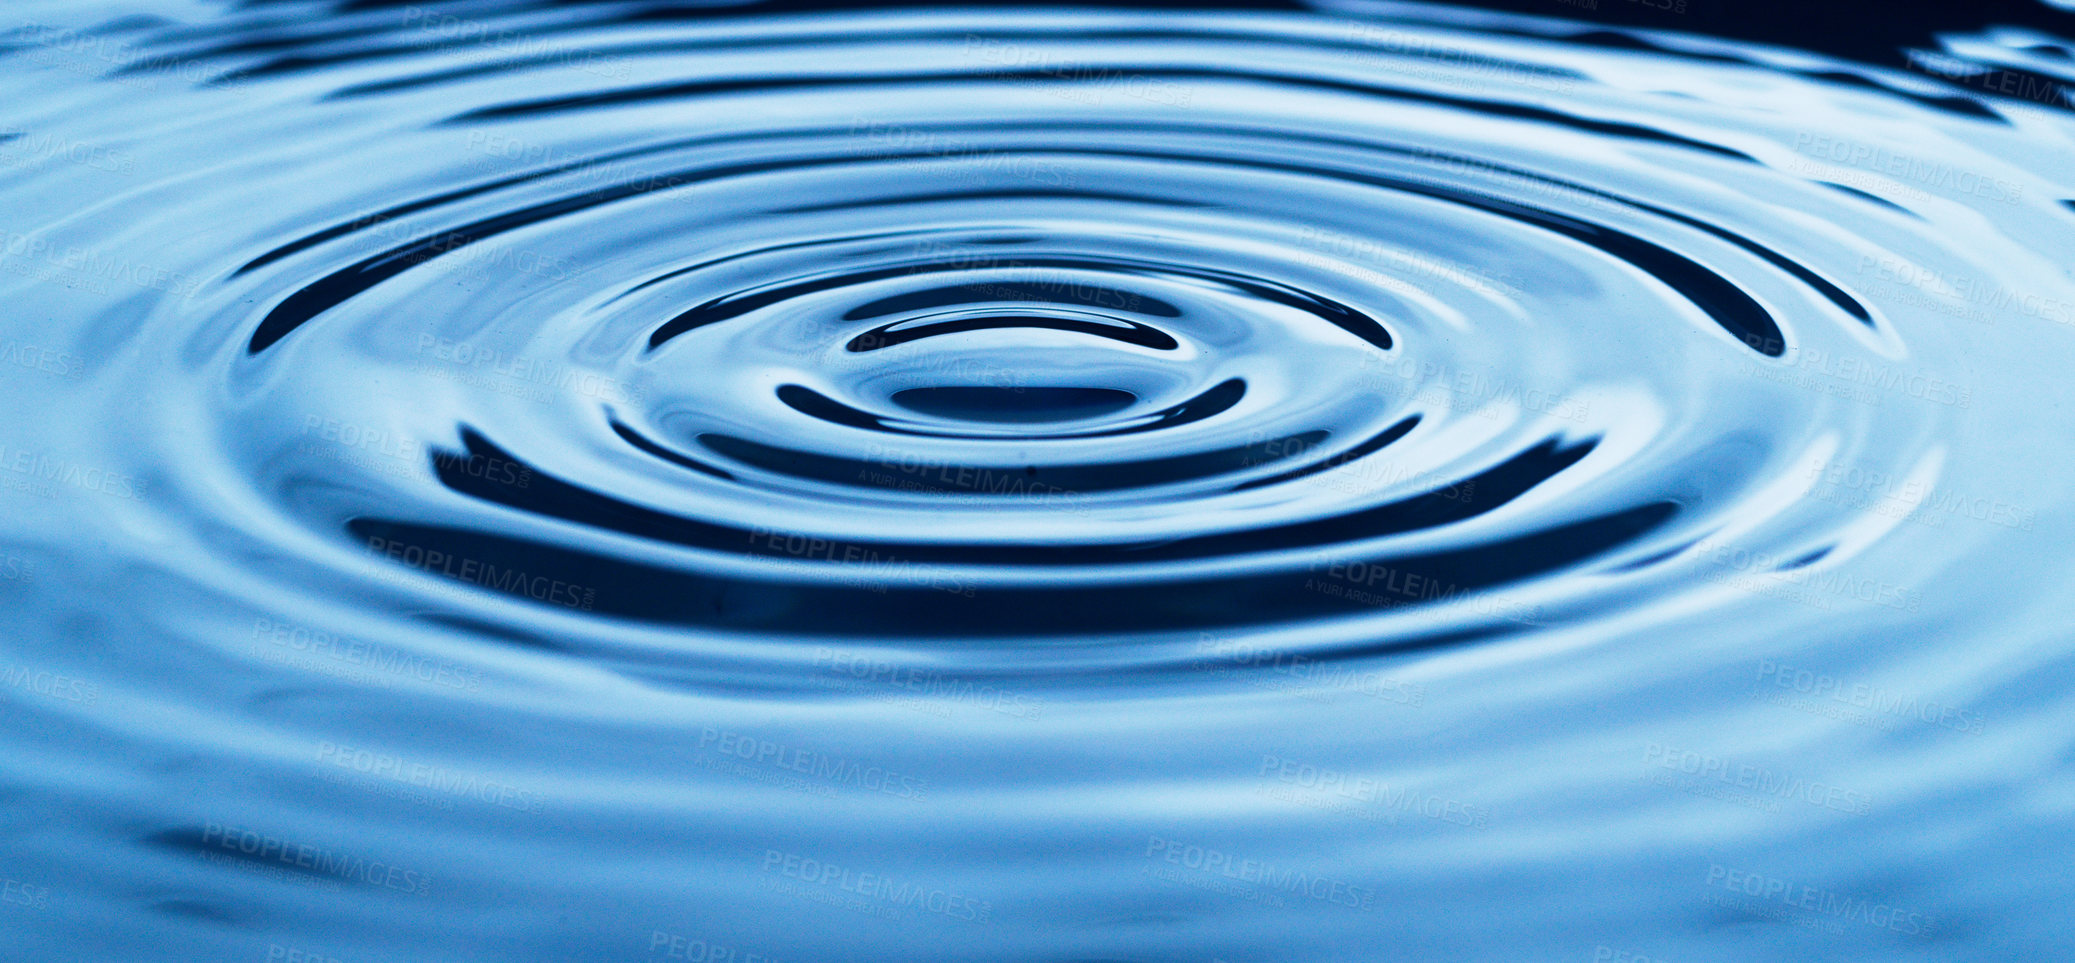 Buy stock photo Abstract studio shot of ripples in a puddle of water